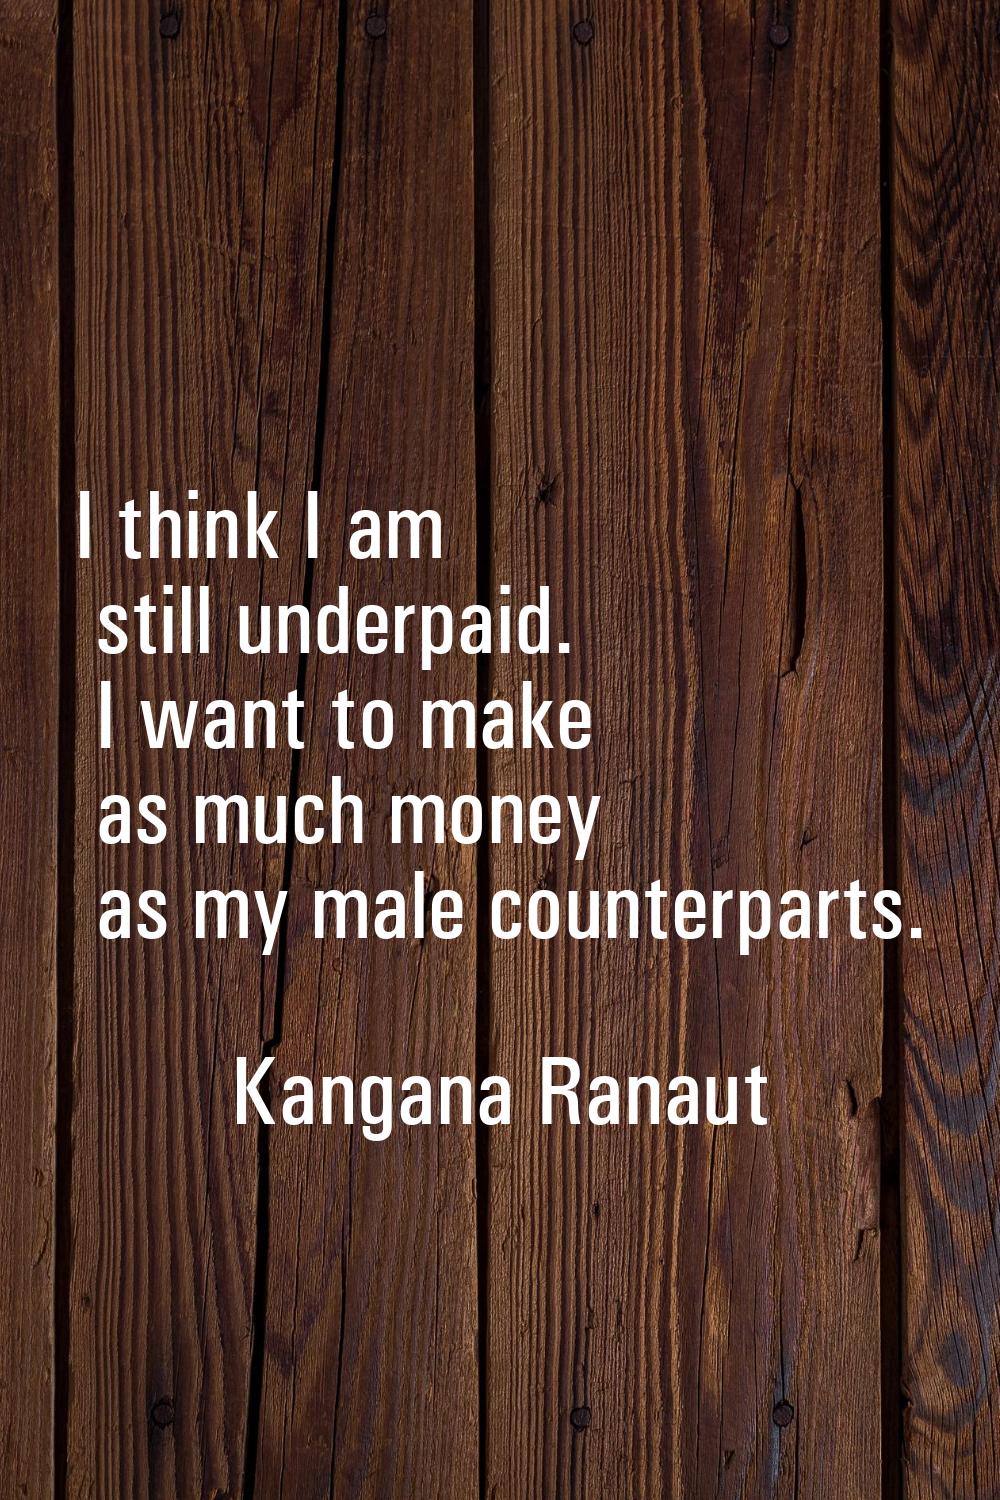 I think I am still underpaid. I want to make as much money as my male counterparts.